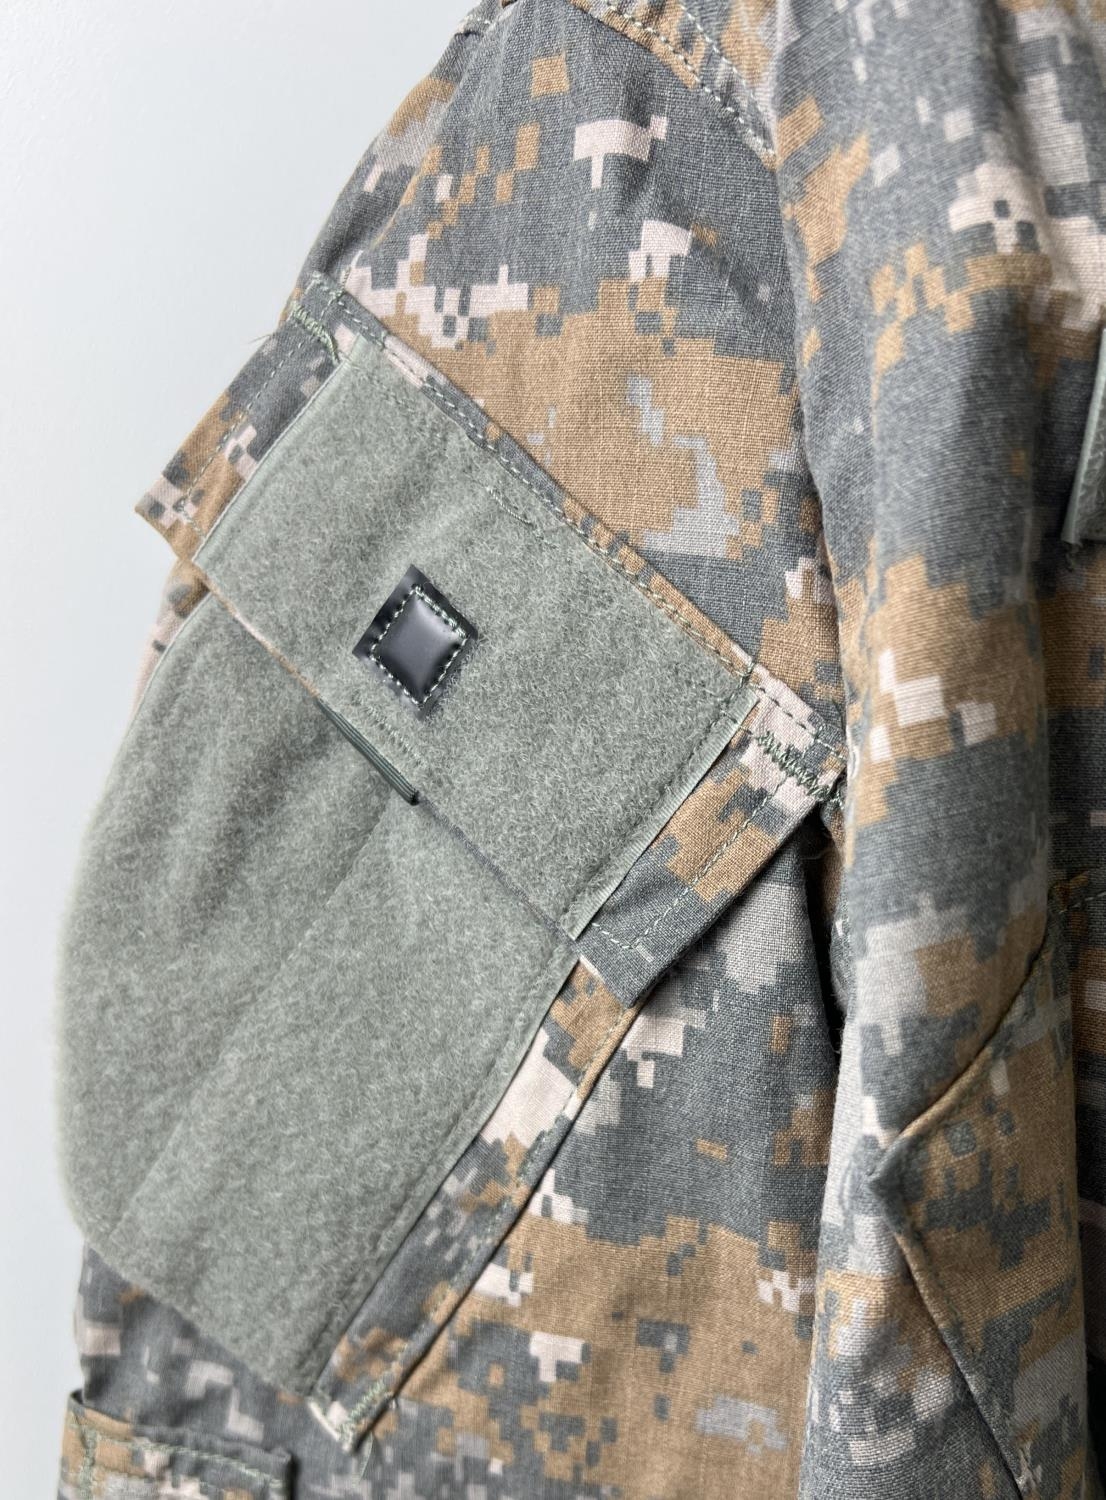 A New with tags US Army combat uniform jacket and trousers in UCP Delta pattern (Universal Combat - Image 2 of 5